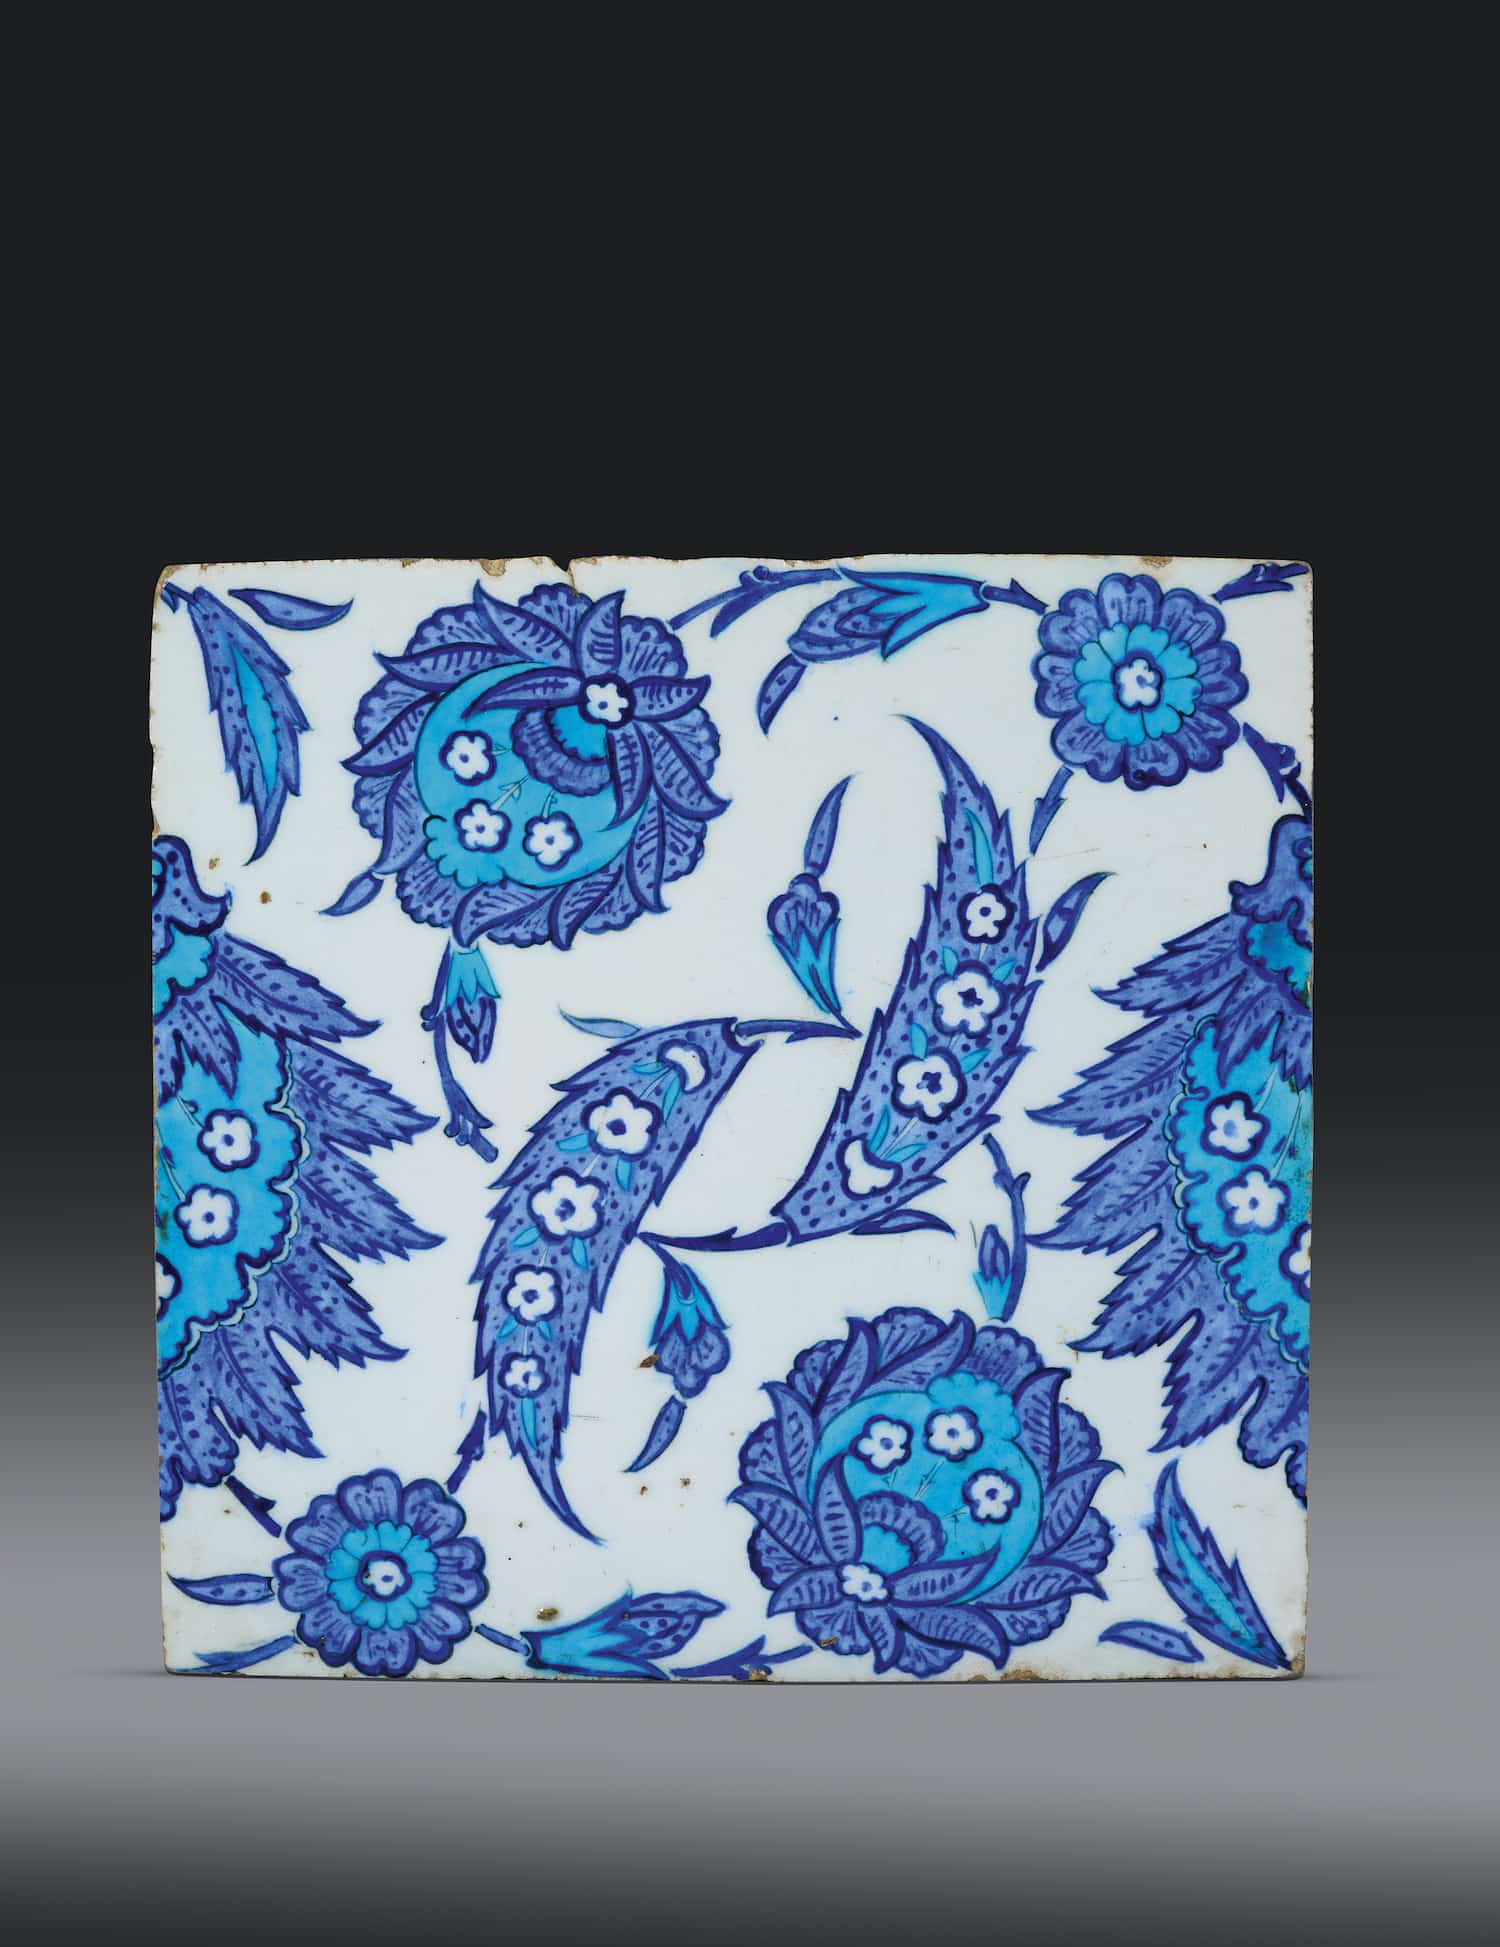 Iznik blue and white tile with saz leaves and khatai blossoms